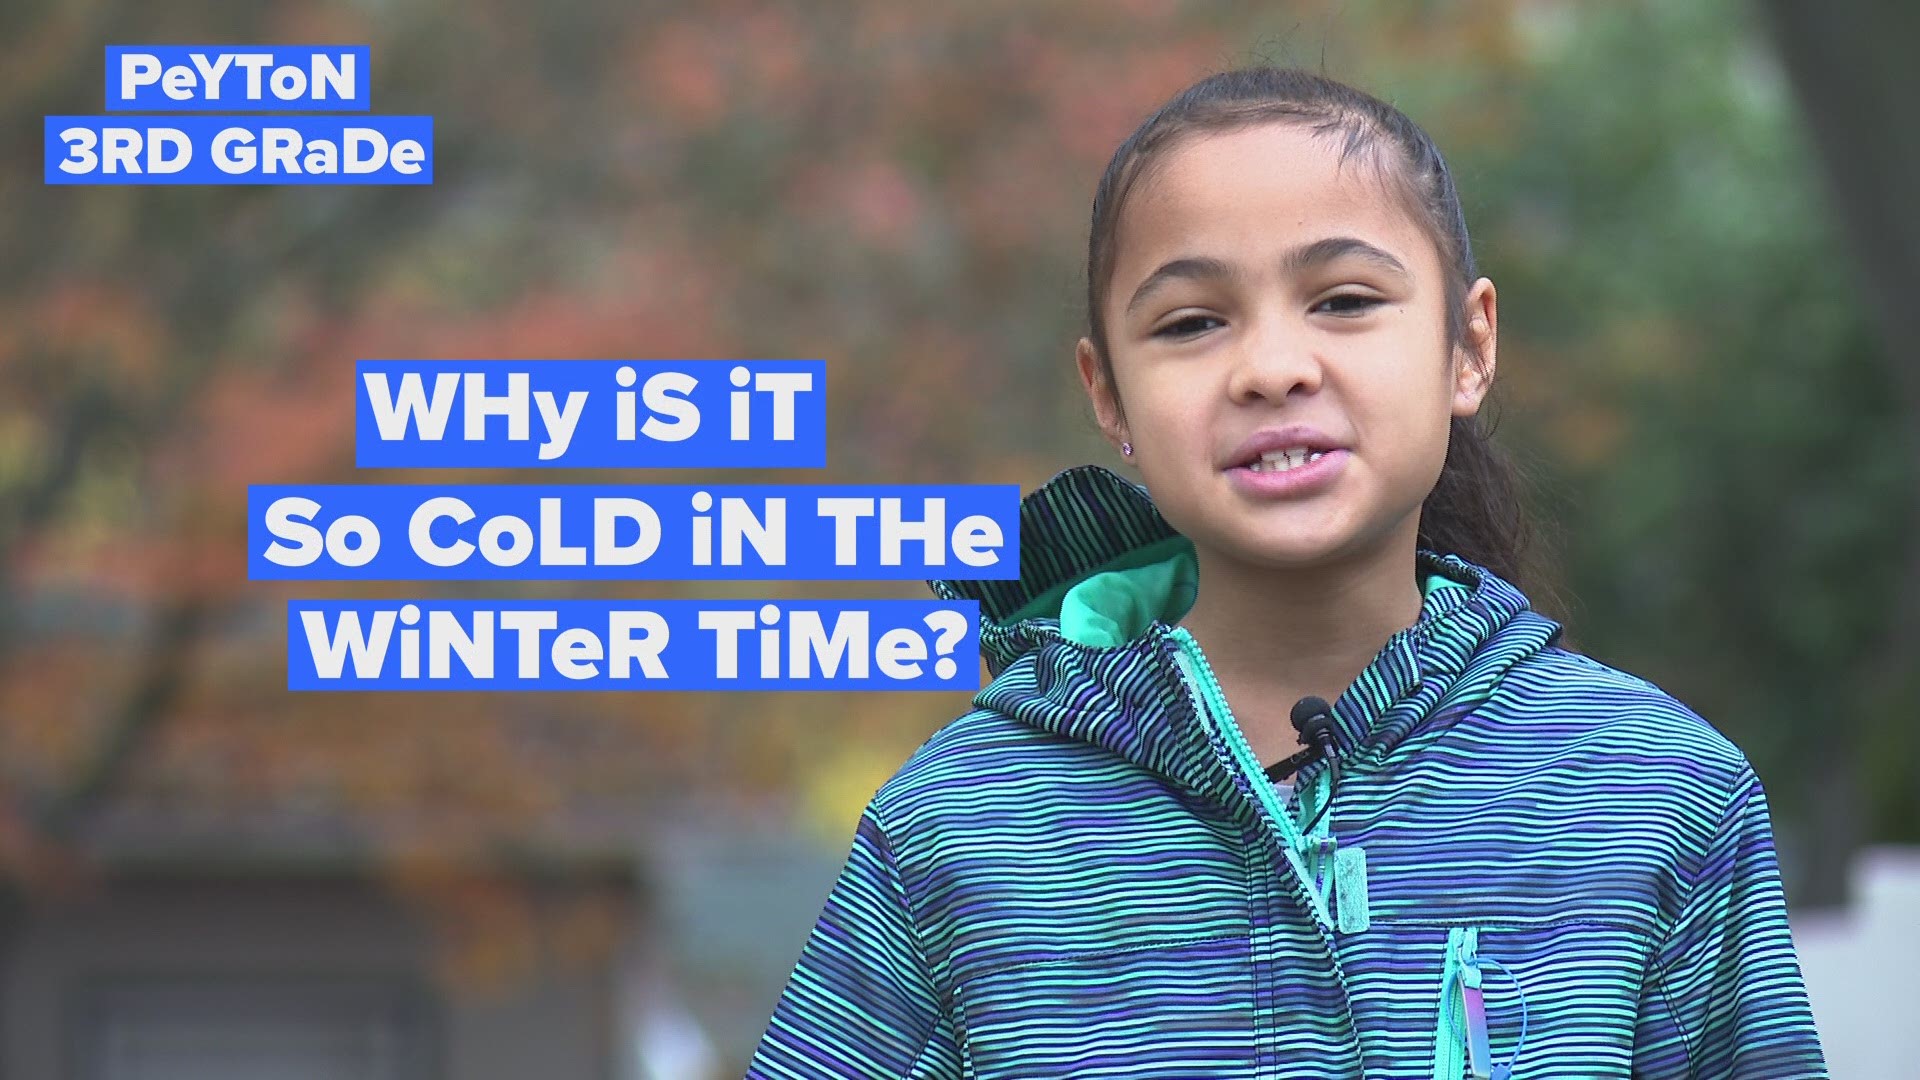 Now it's time for Weather You Know, when Rob Carlmark answer kid's questions about...well, the weather.